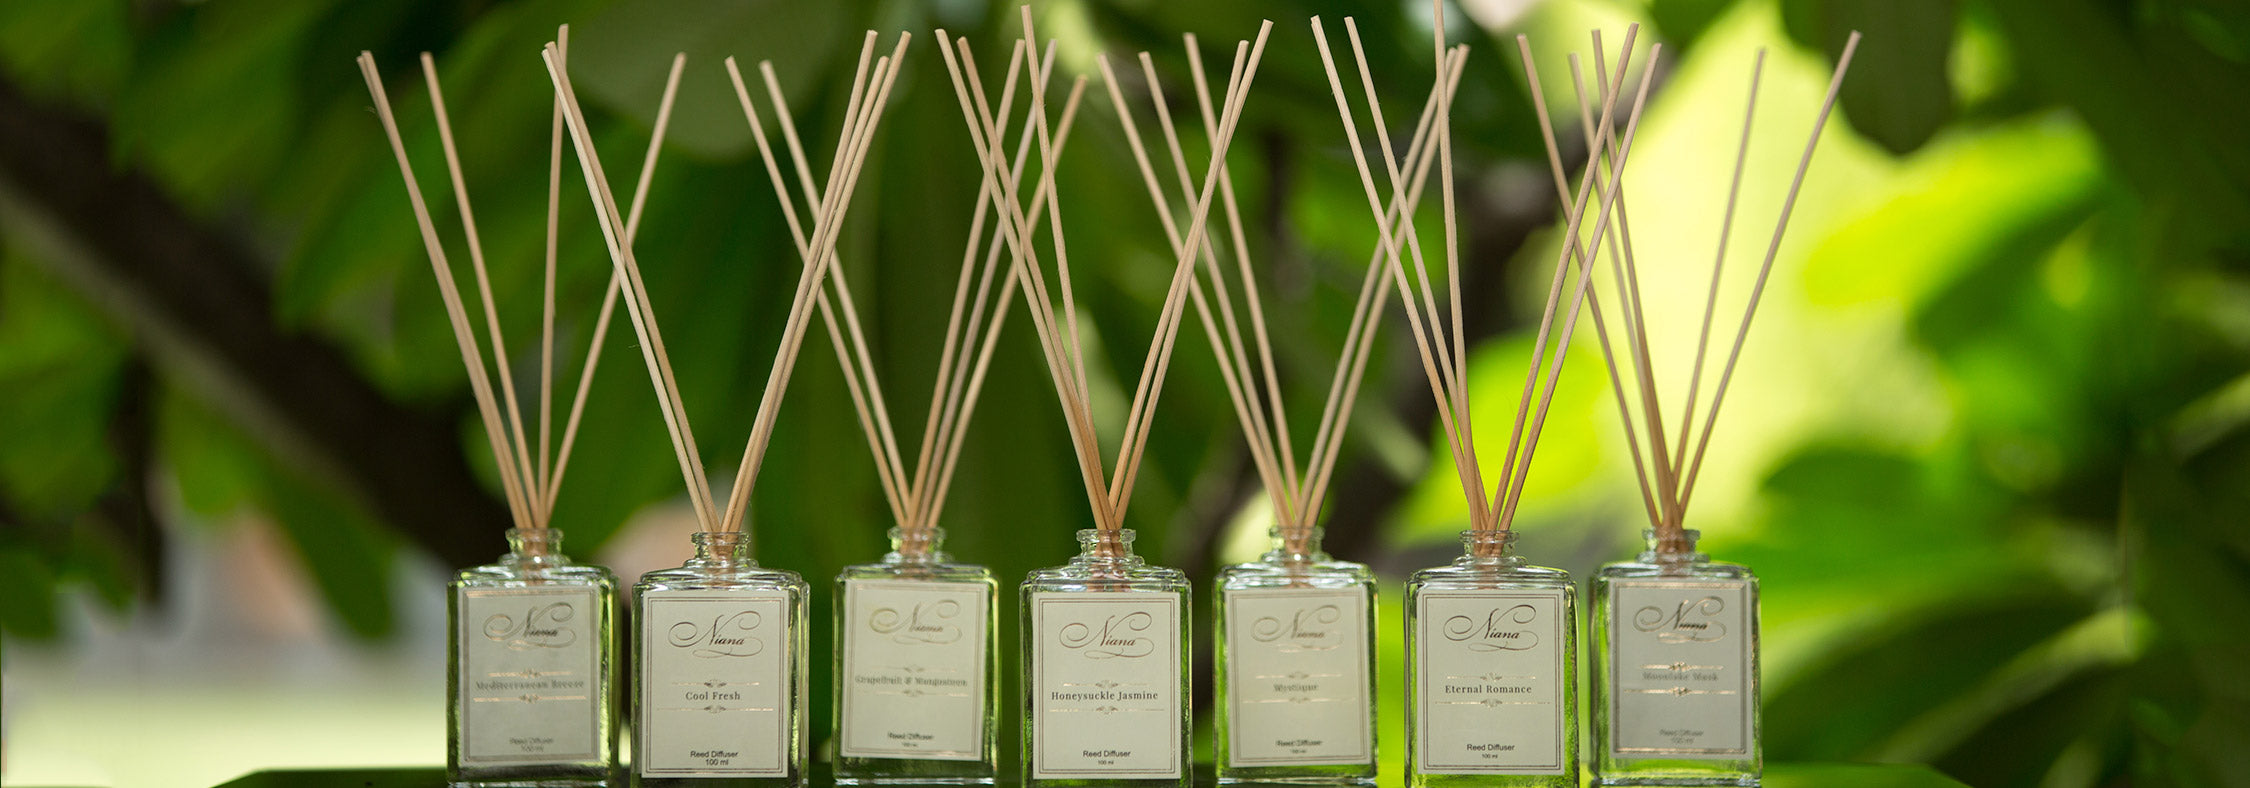 reed diffuser online